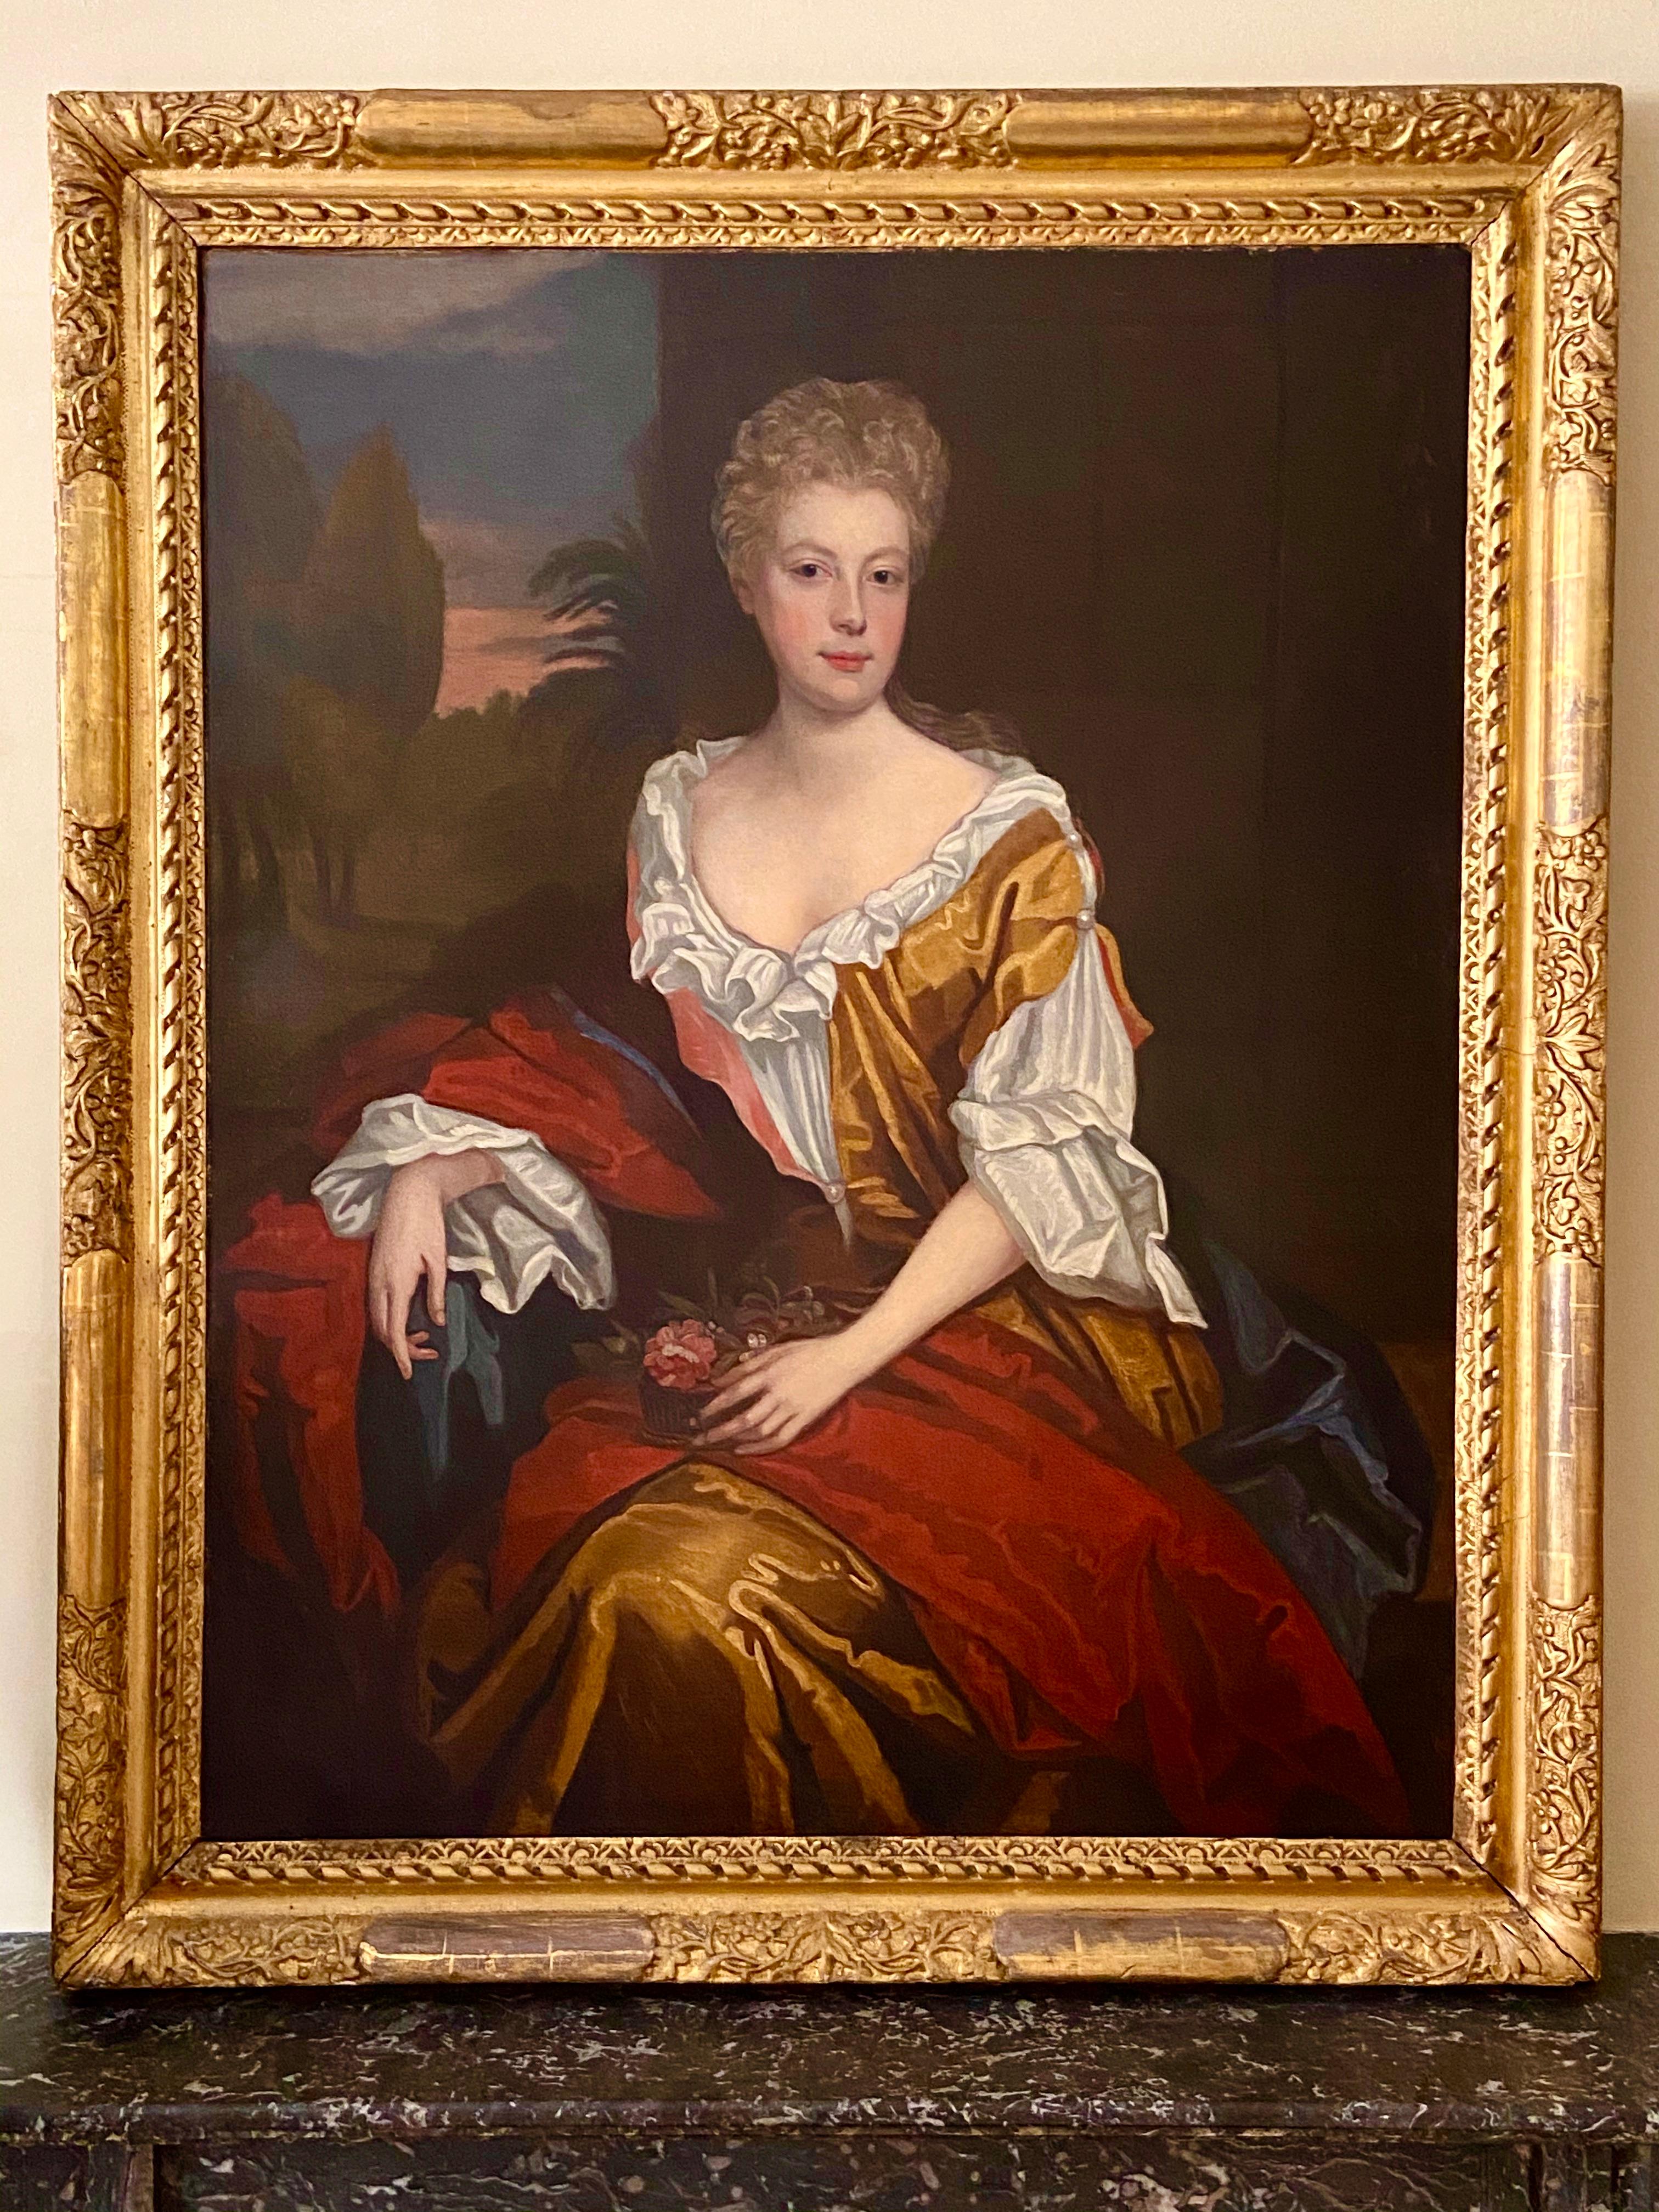 LATE 17TH CENTURY ENGLISH PORTRAIT - A LADY  IN A RED / YELLOW SILK DRESS c.1700 - Brown Portrait Painting by Follower of Willian Wissing